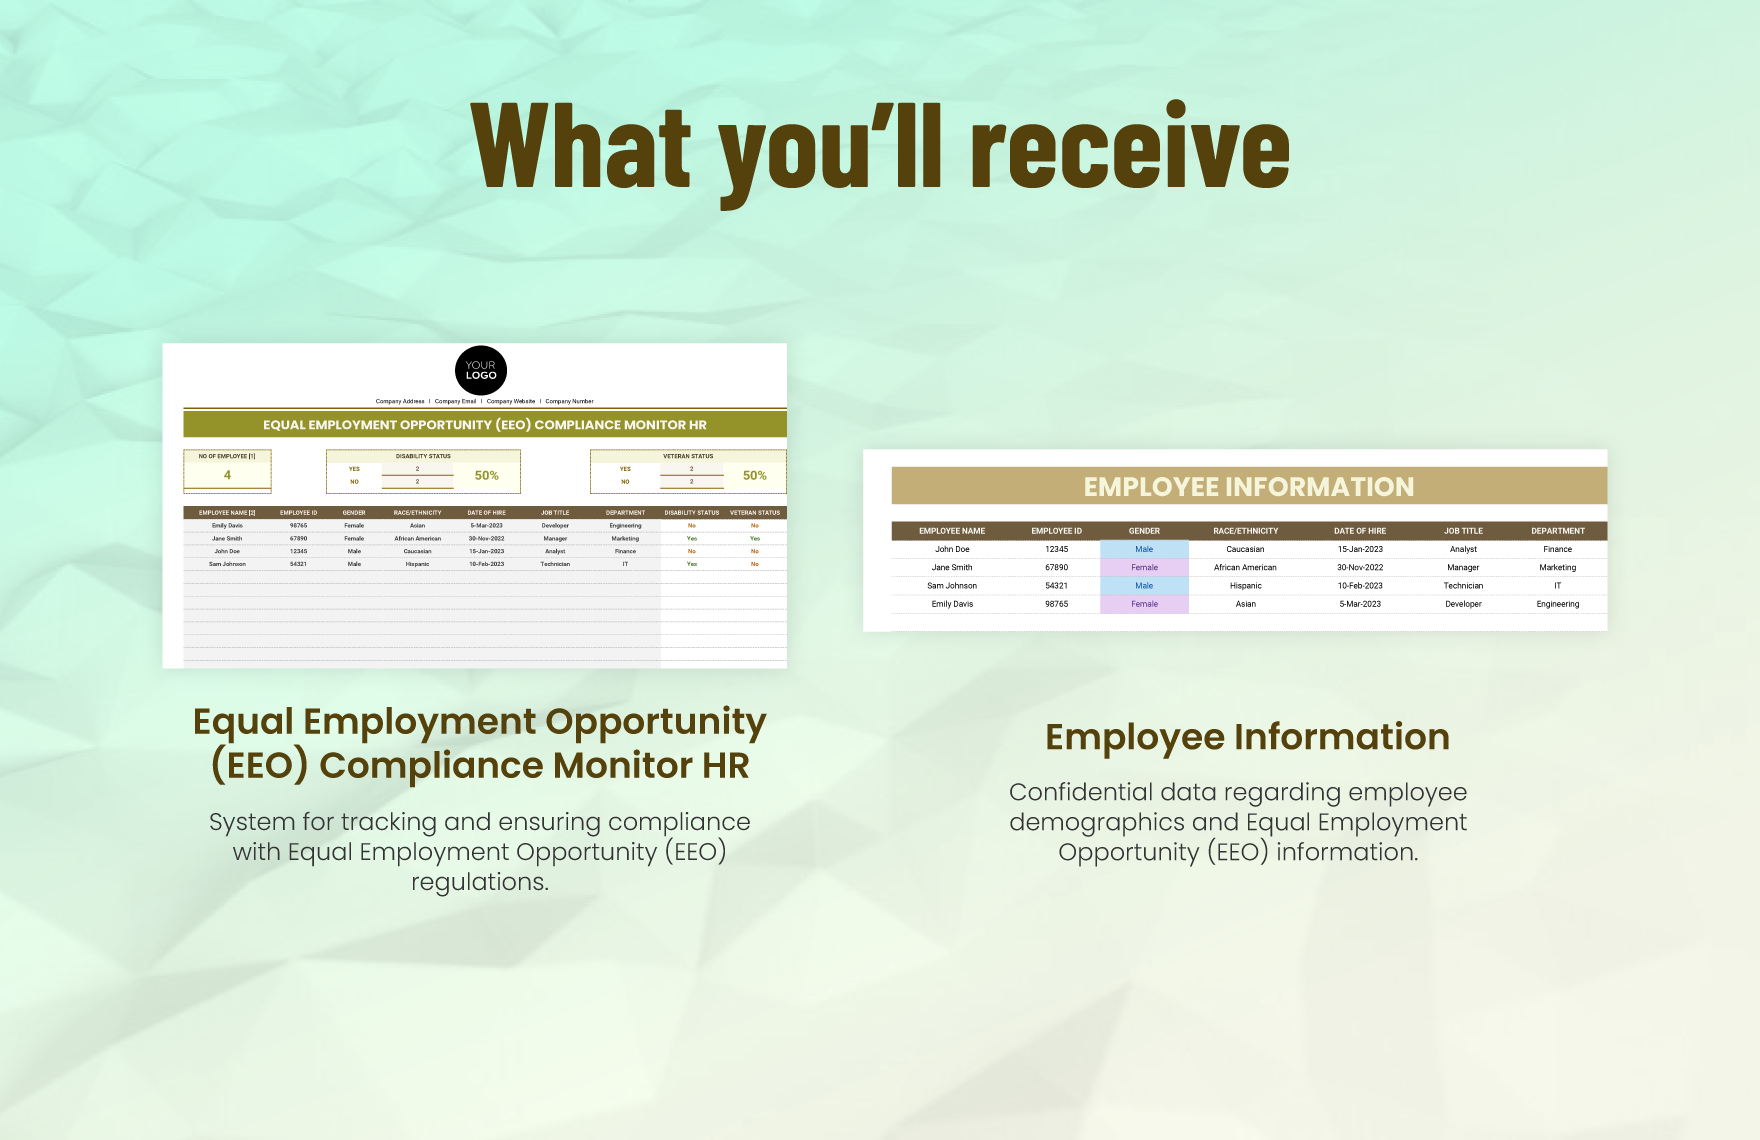 Equal Employment Opportunity (EEO) Compliance Monitor HR Template